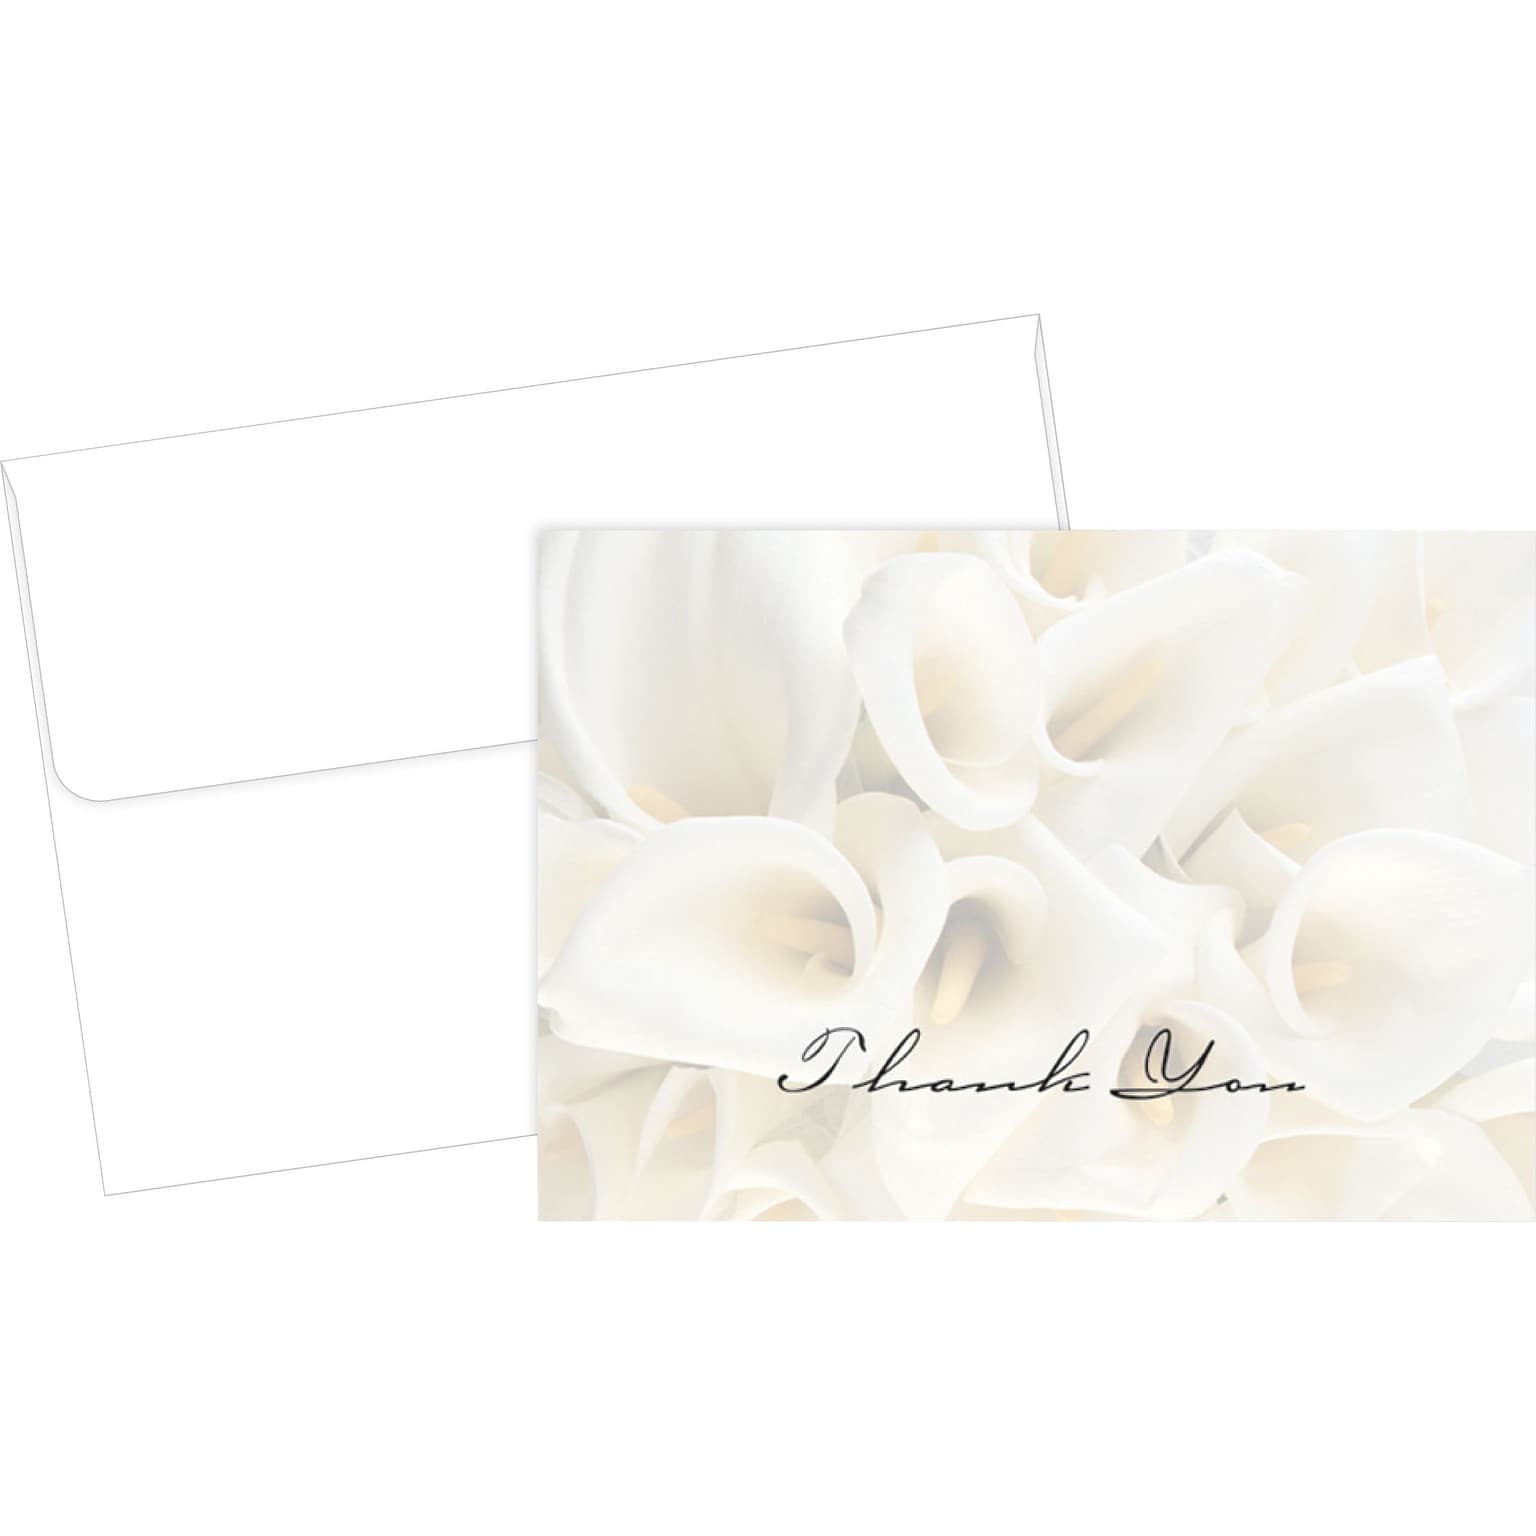 Great Papers® White Calla Lilies Thank You Cards, 50/Pack